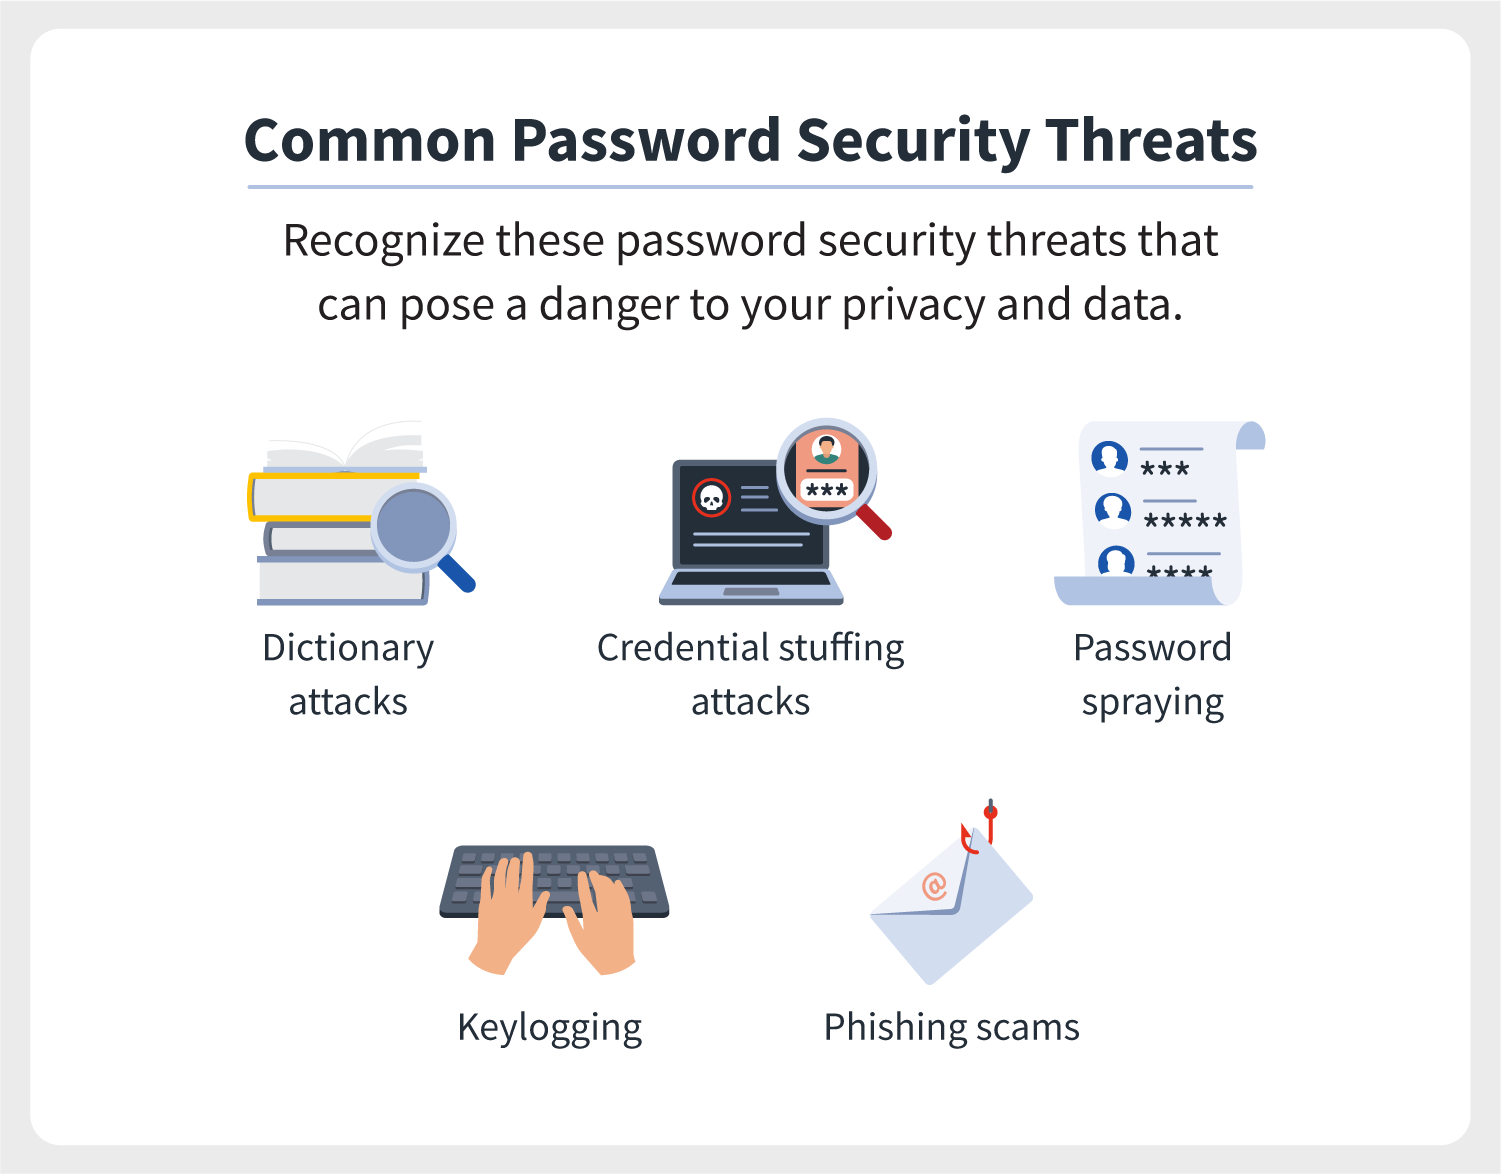 Five illustrations accompany the most common password security threats, including dictionary attacks, credential stuffing attacks, password spraying, keylogging, and phishing scams.  